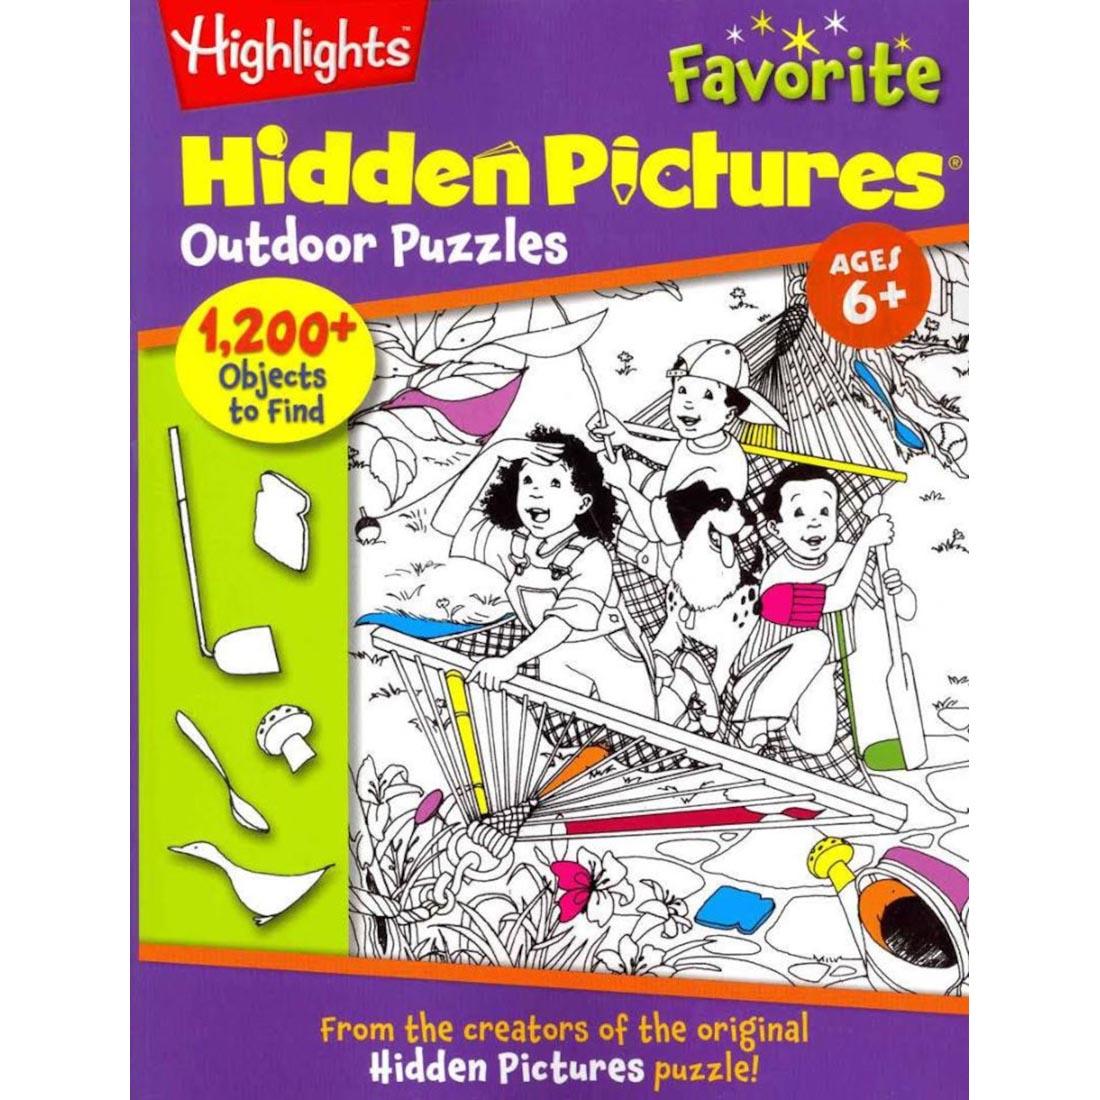 Highlights Favorite Hidden Pictures Outdoor Puzzles